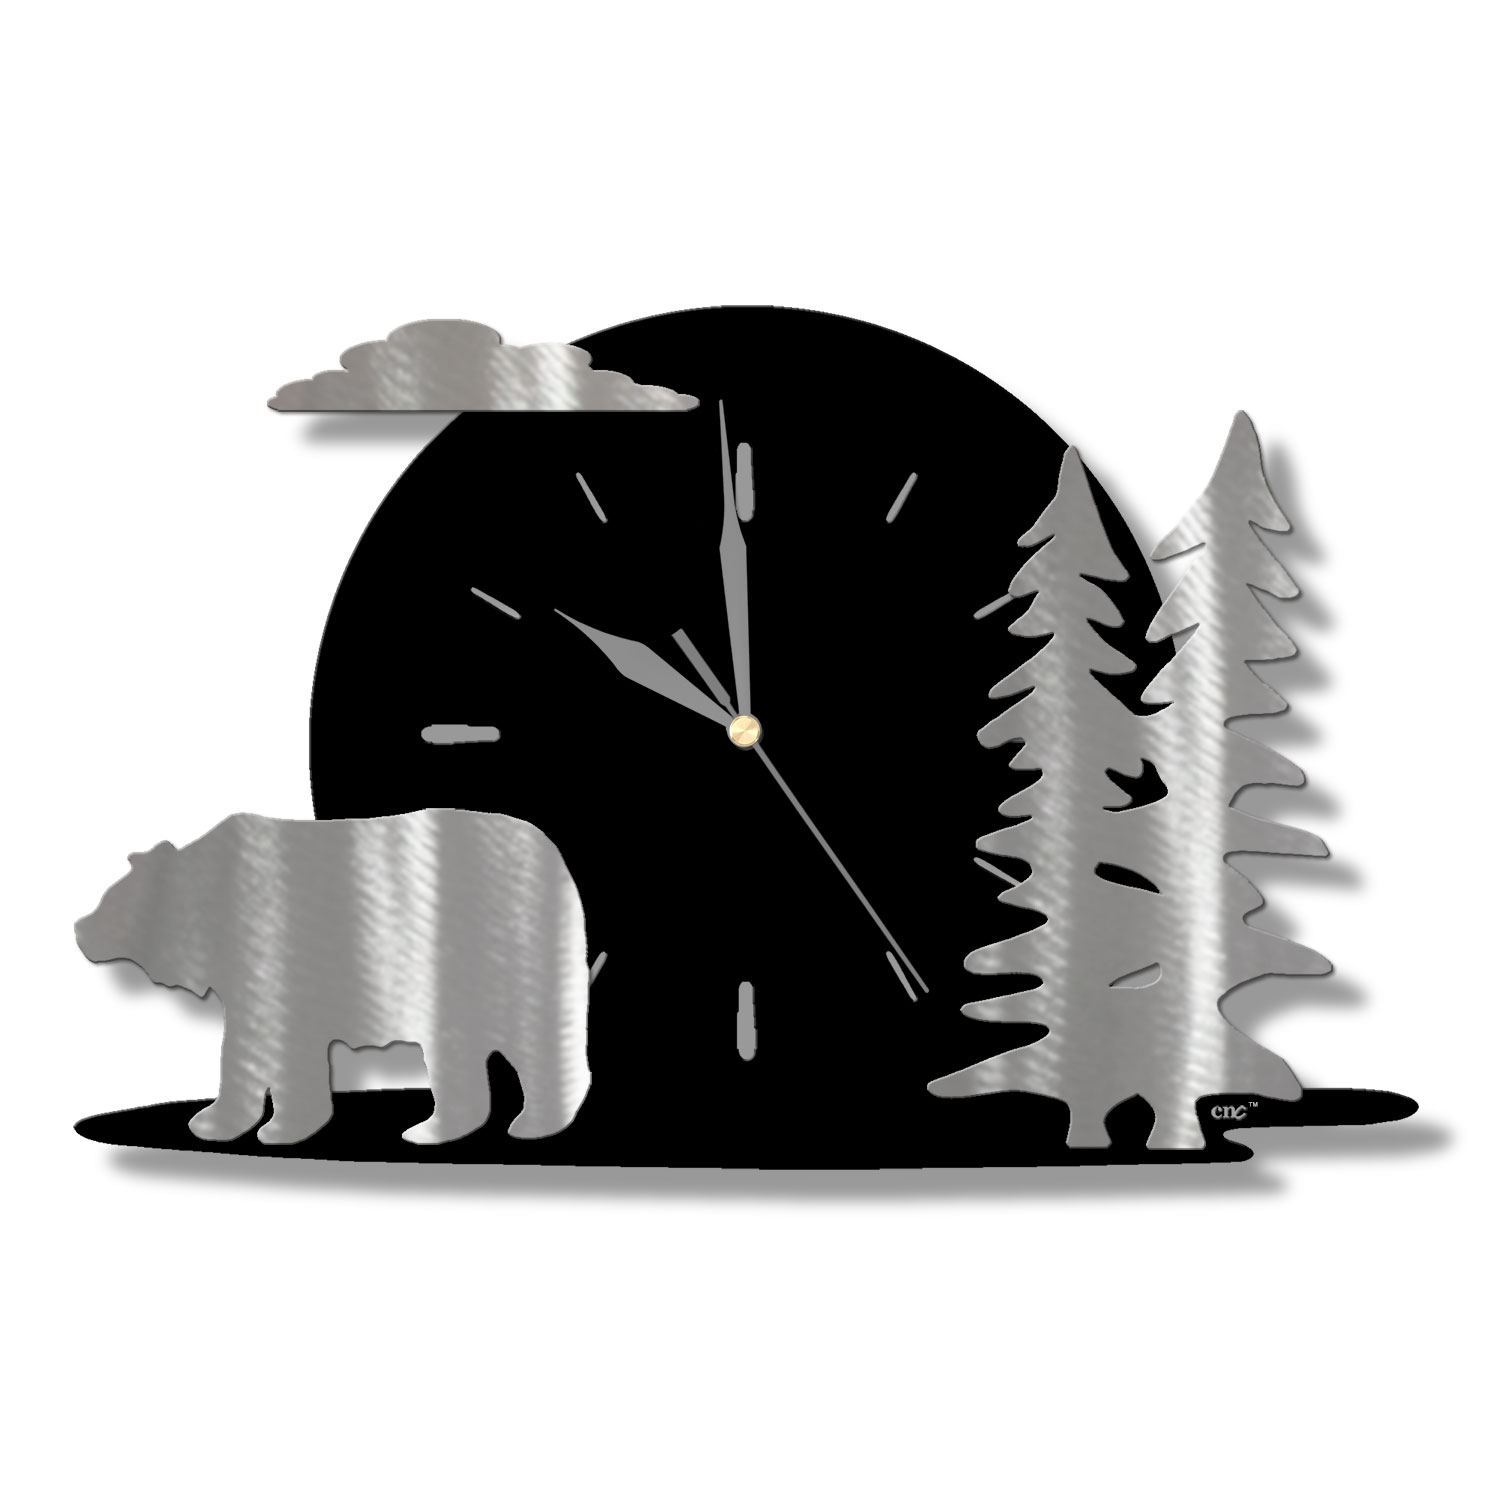 604007 - Moonrise 15in Wall Clock - Bear and Trees - Choose Color